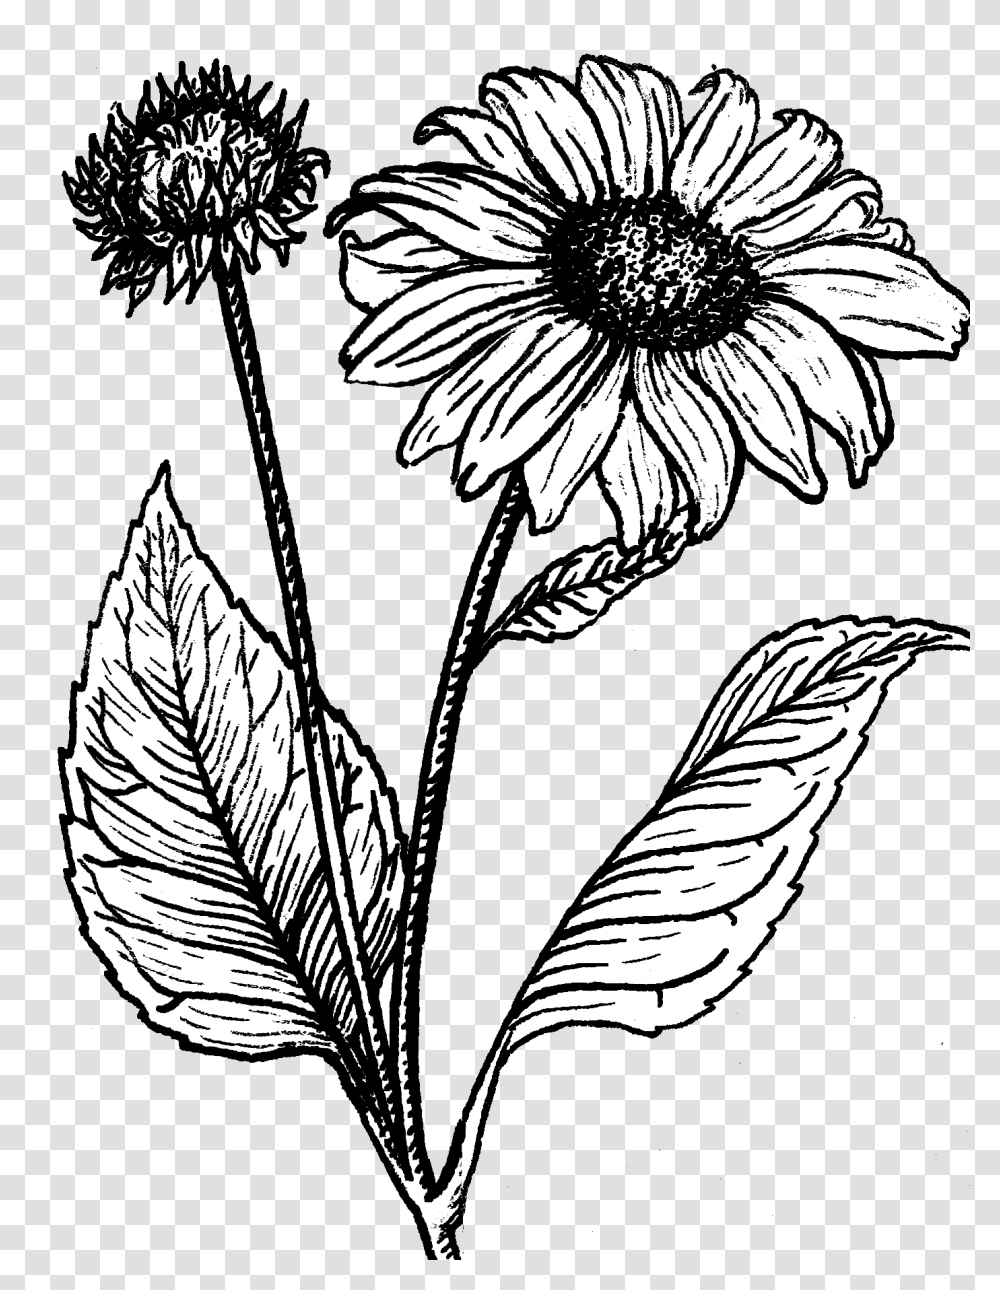 Sunflower Black And White Line Drawing Sunflower, Plant, Daisy, Daisies, Blossom Transparent Png